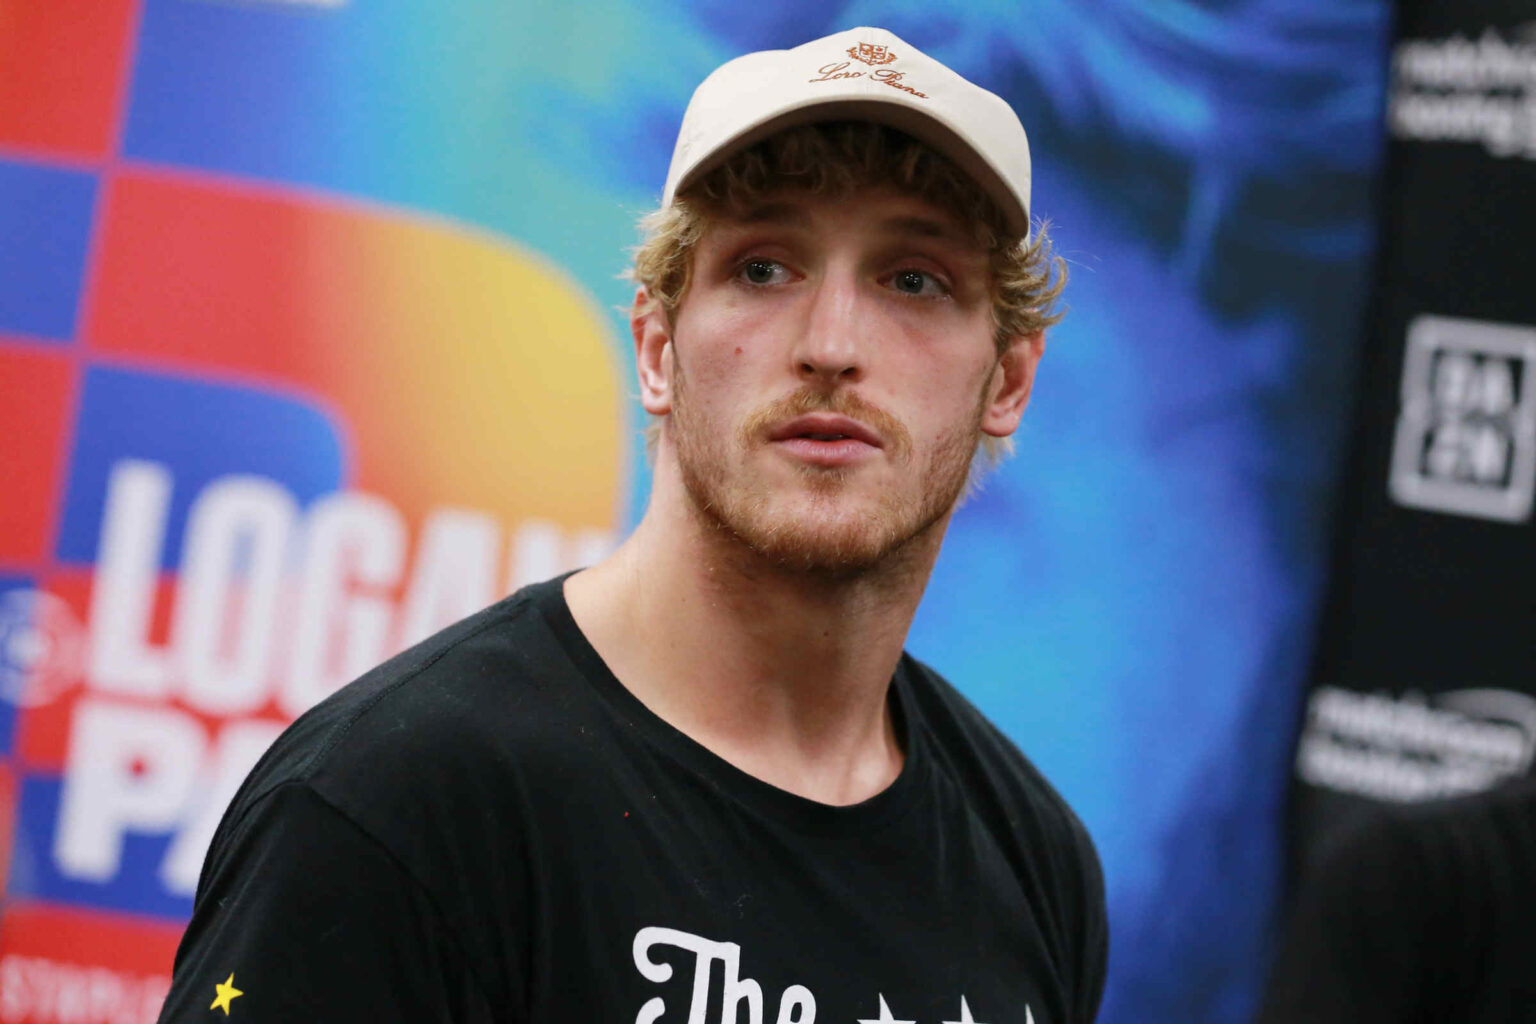 Logan Paul knows how to run his mouth, but can he run a country? His recently leaked plans to run for the presidency seem to suggest he thinks so.